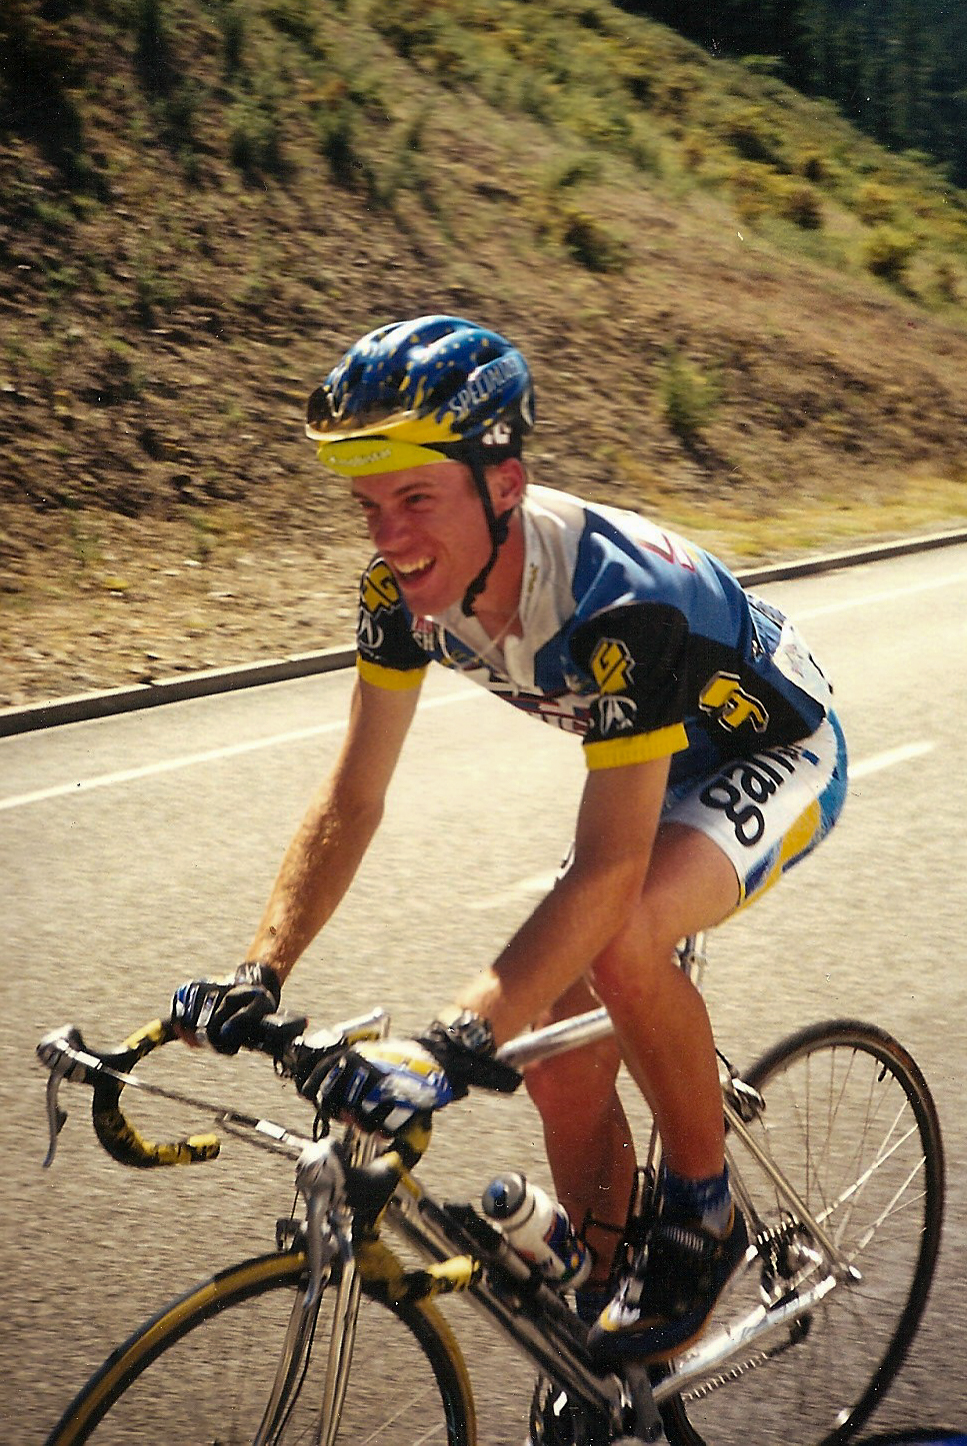 Me, Blenheim to Nelson road race. Either 1998 or 2000